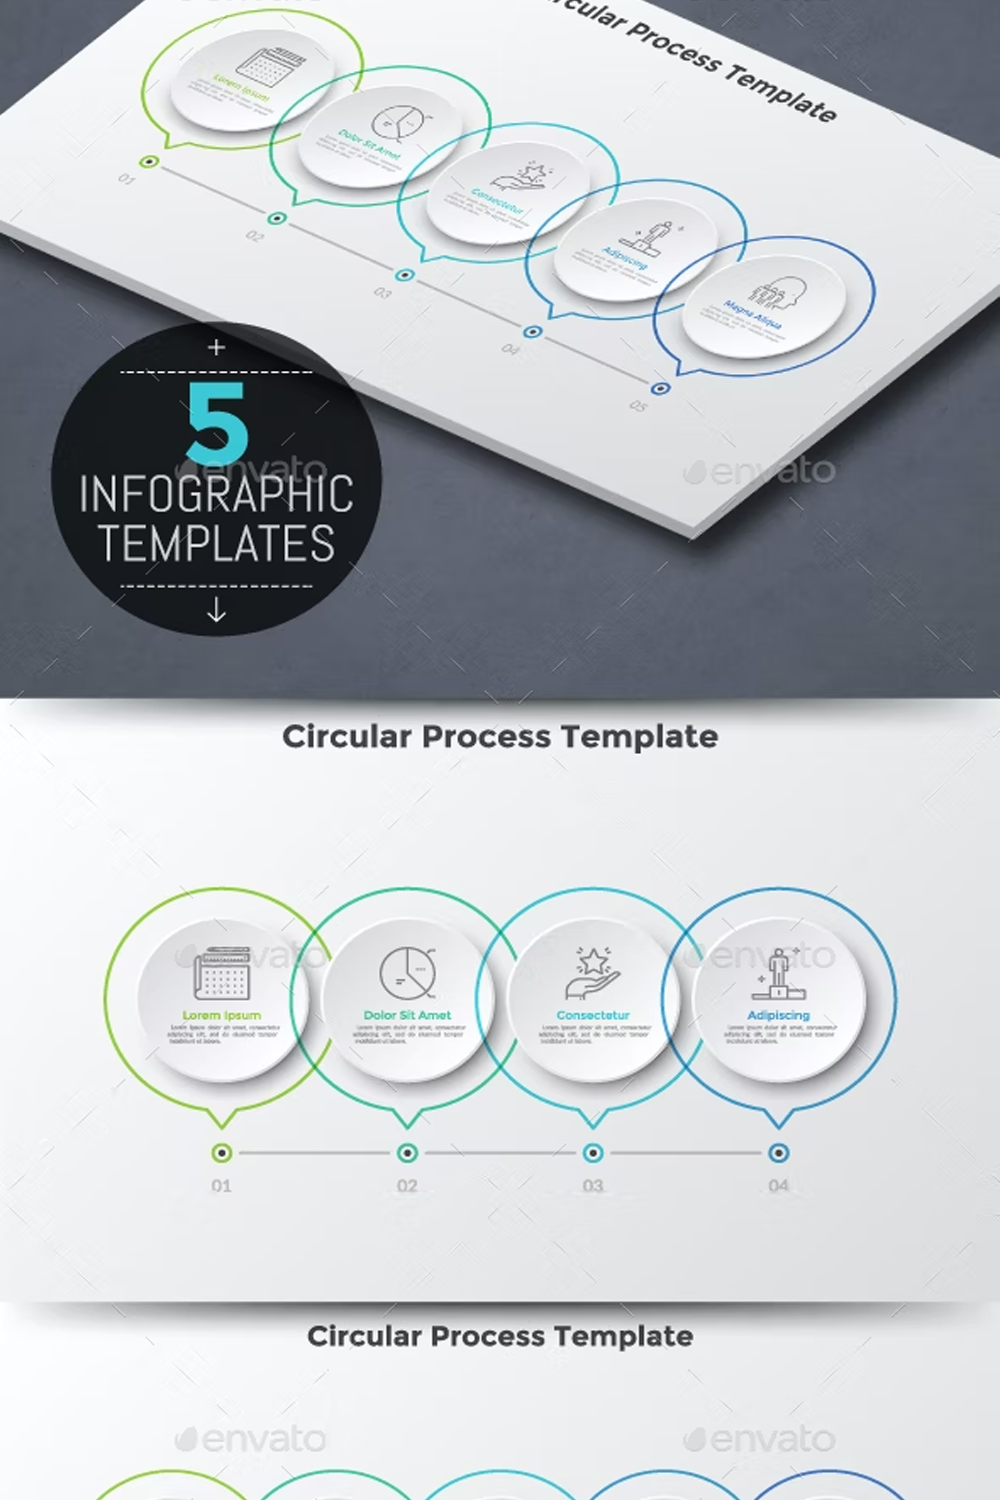 Illustrations 5 process infographic templates of pinterest.